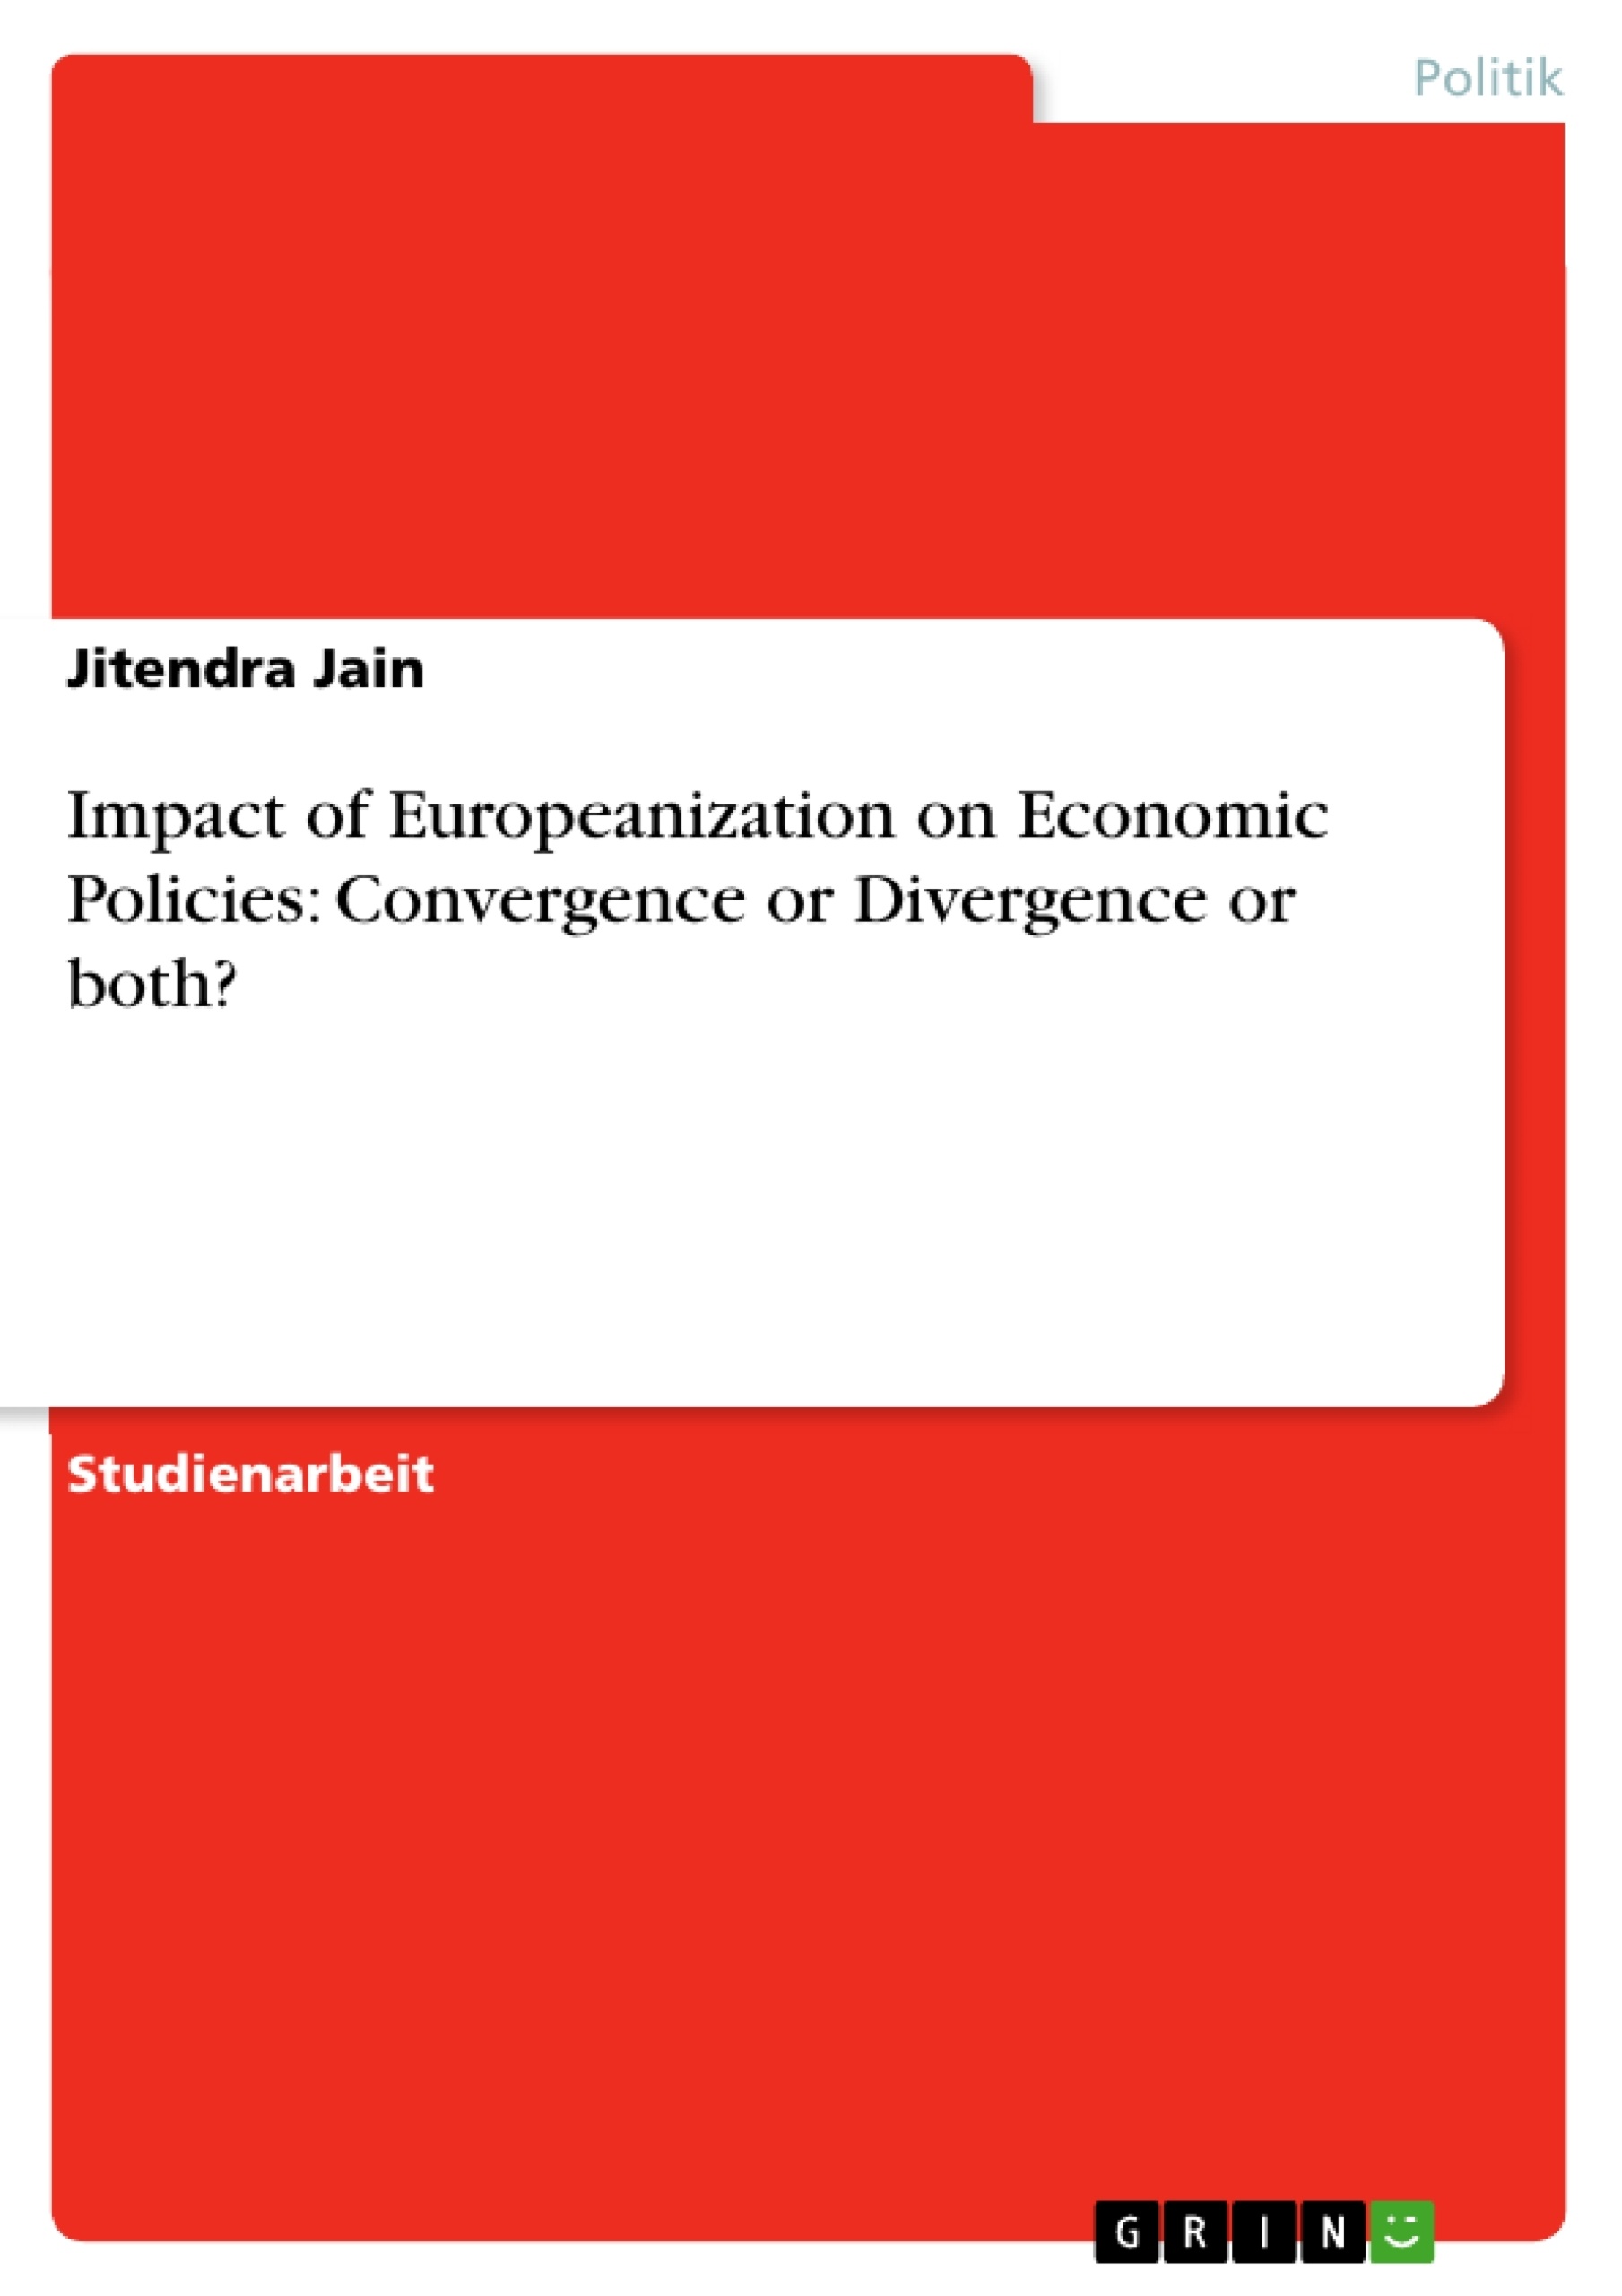 Titel: Impact of Europeanization on Economic Policies: Convergence or Divergence or both?